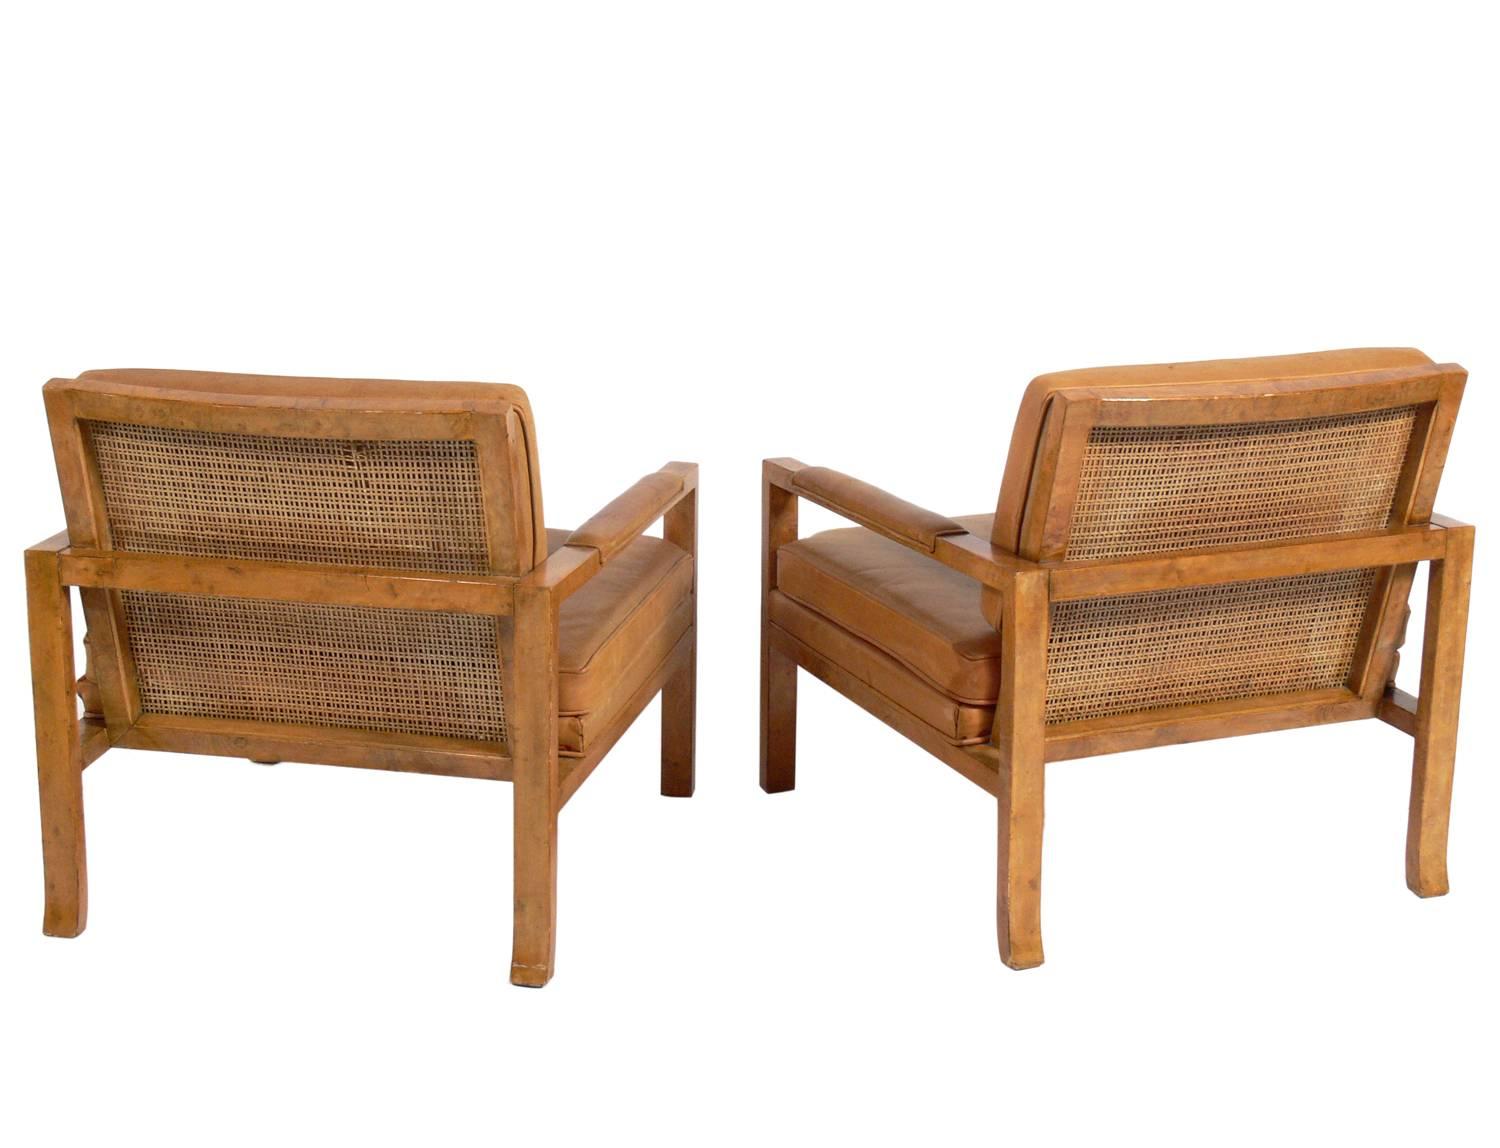 American Pair of Caned Back Burl Wood Lounge Chairs in Original Saddle Leather